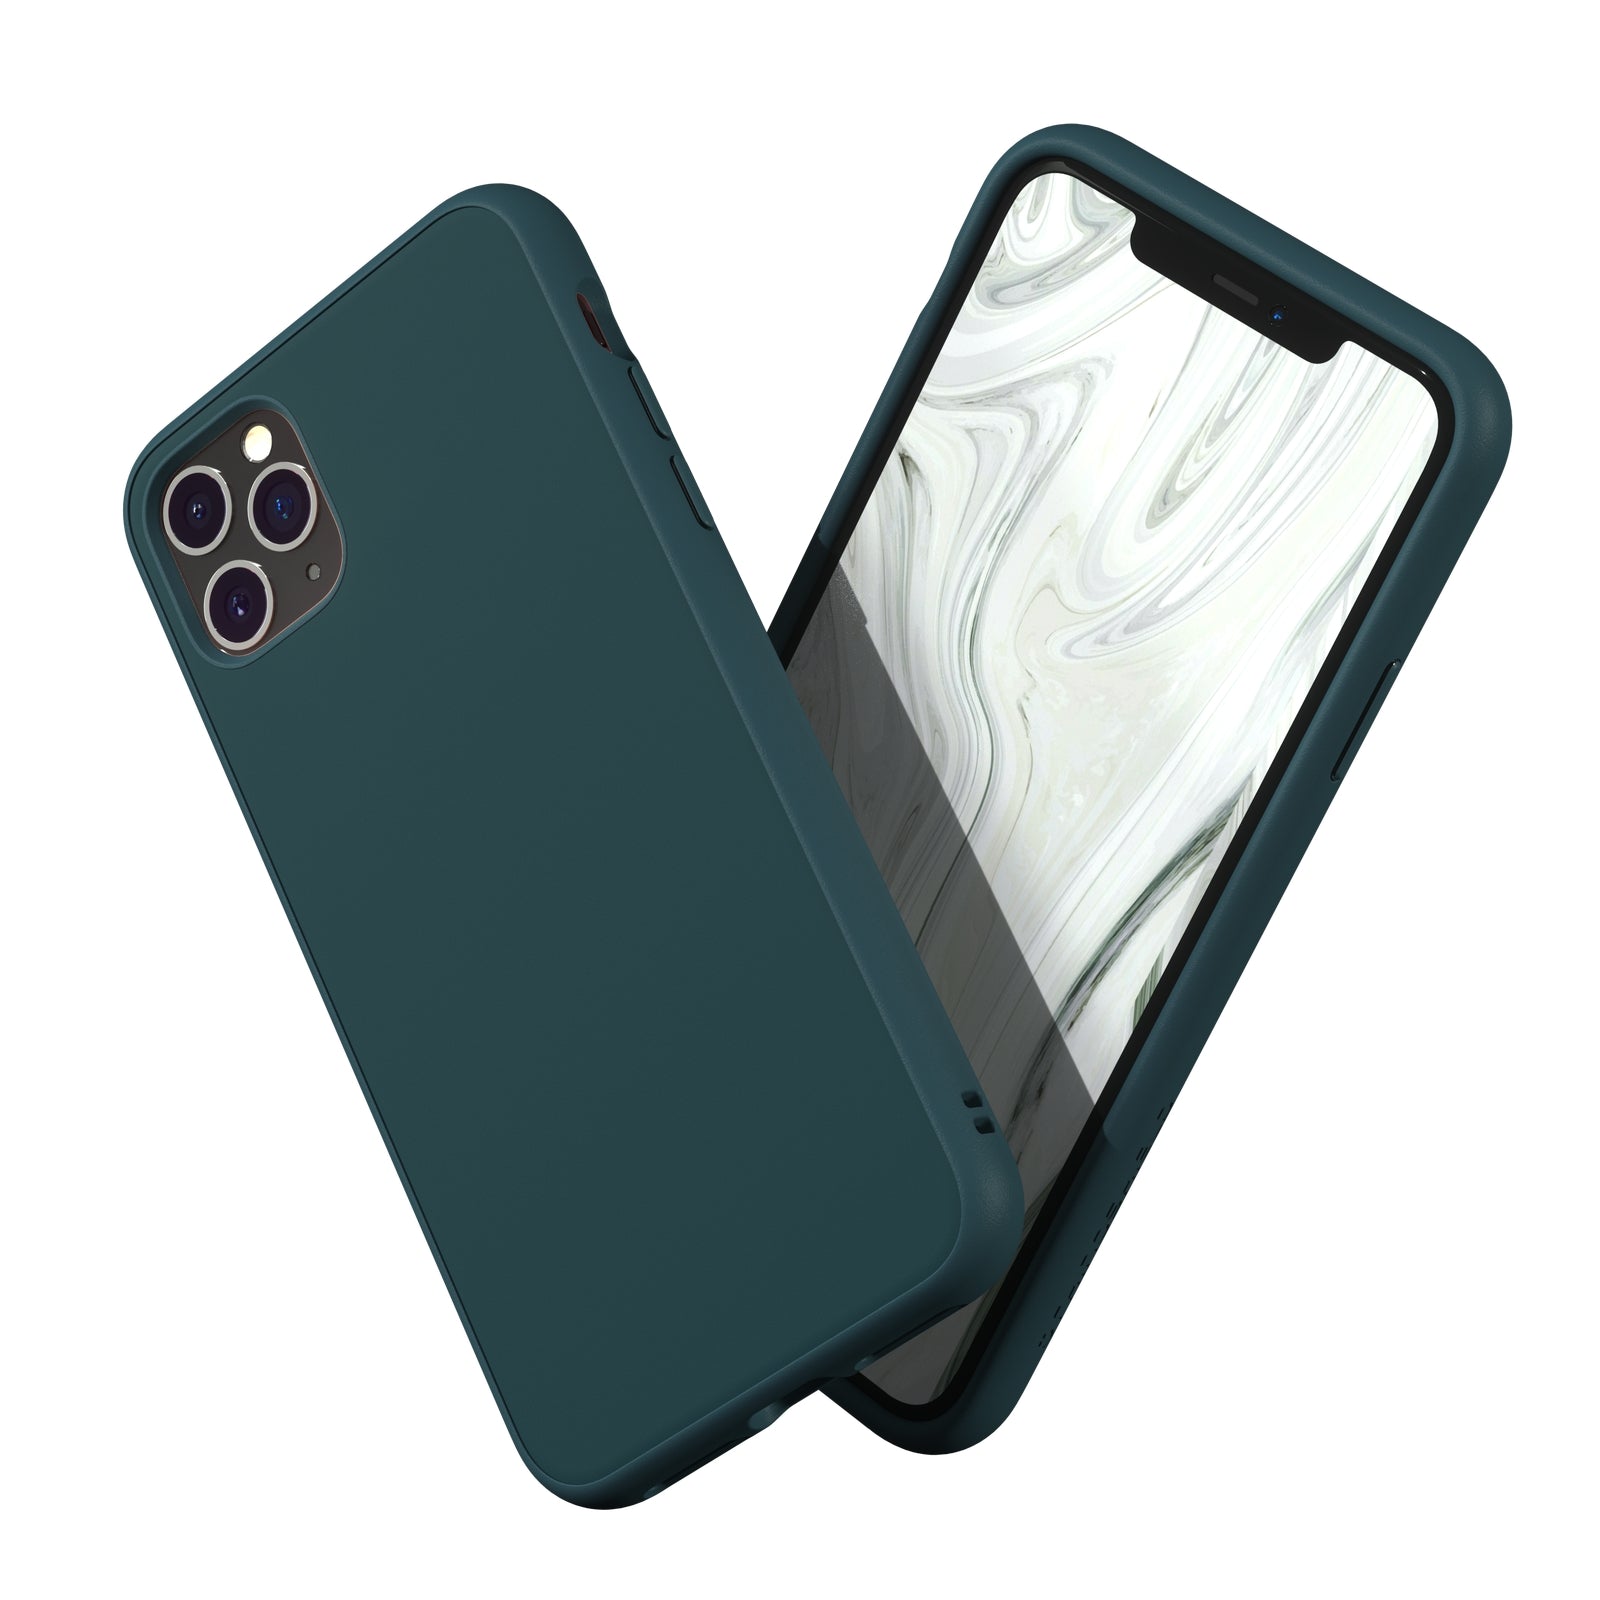 RhinoShield SolidSuit Dark Teal iPhone11/Pro/ProMax Shock Absorbent Slim Cover, Premium Matte Finish 3.5M/11ft Drop Protection